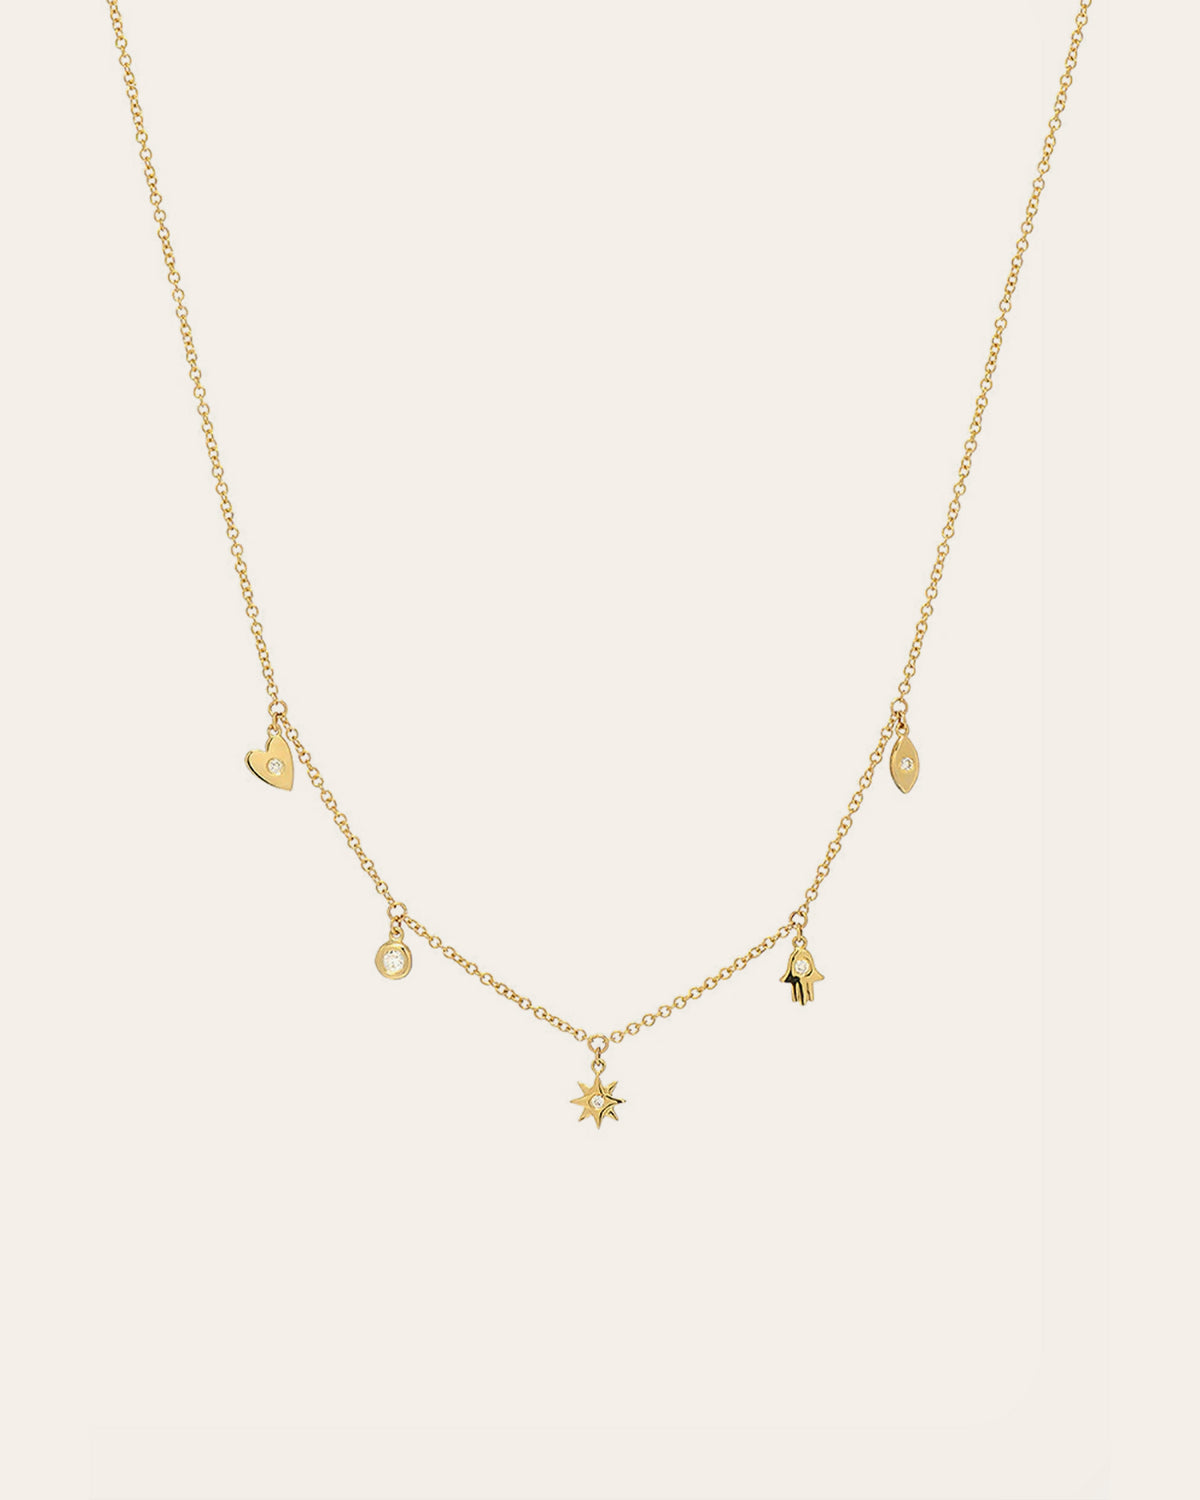 14k Gold and Diamond Charms Necklace